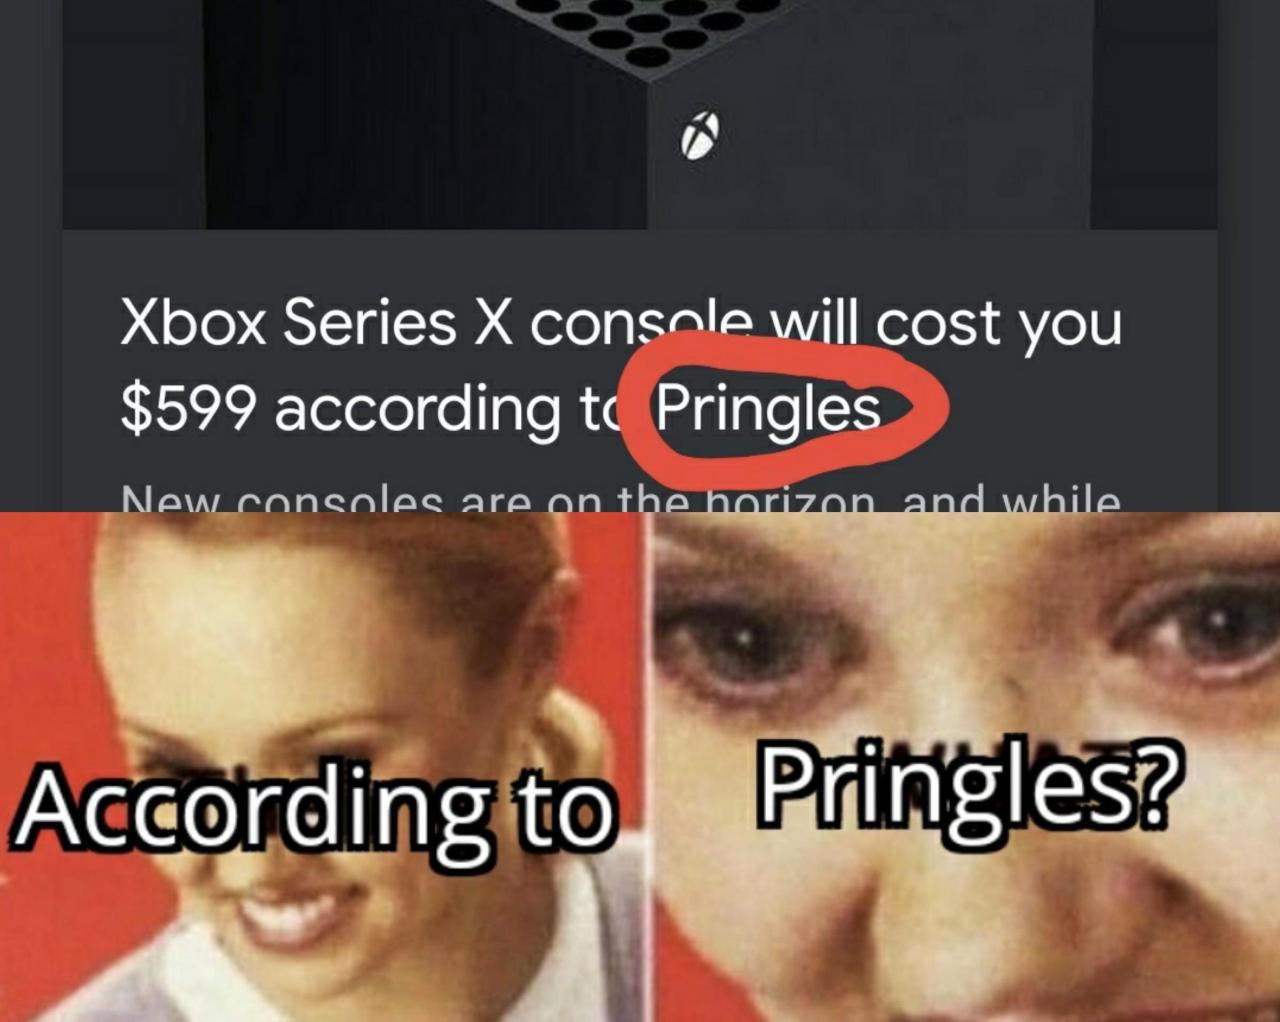 funny gaming memes - chips memes - Xbox Series X console will cost you $599 according to Pringles New consoles are on the horizon and while According to Pringles?